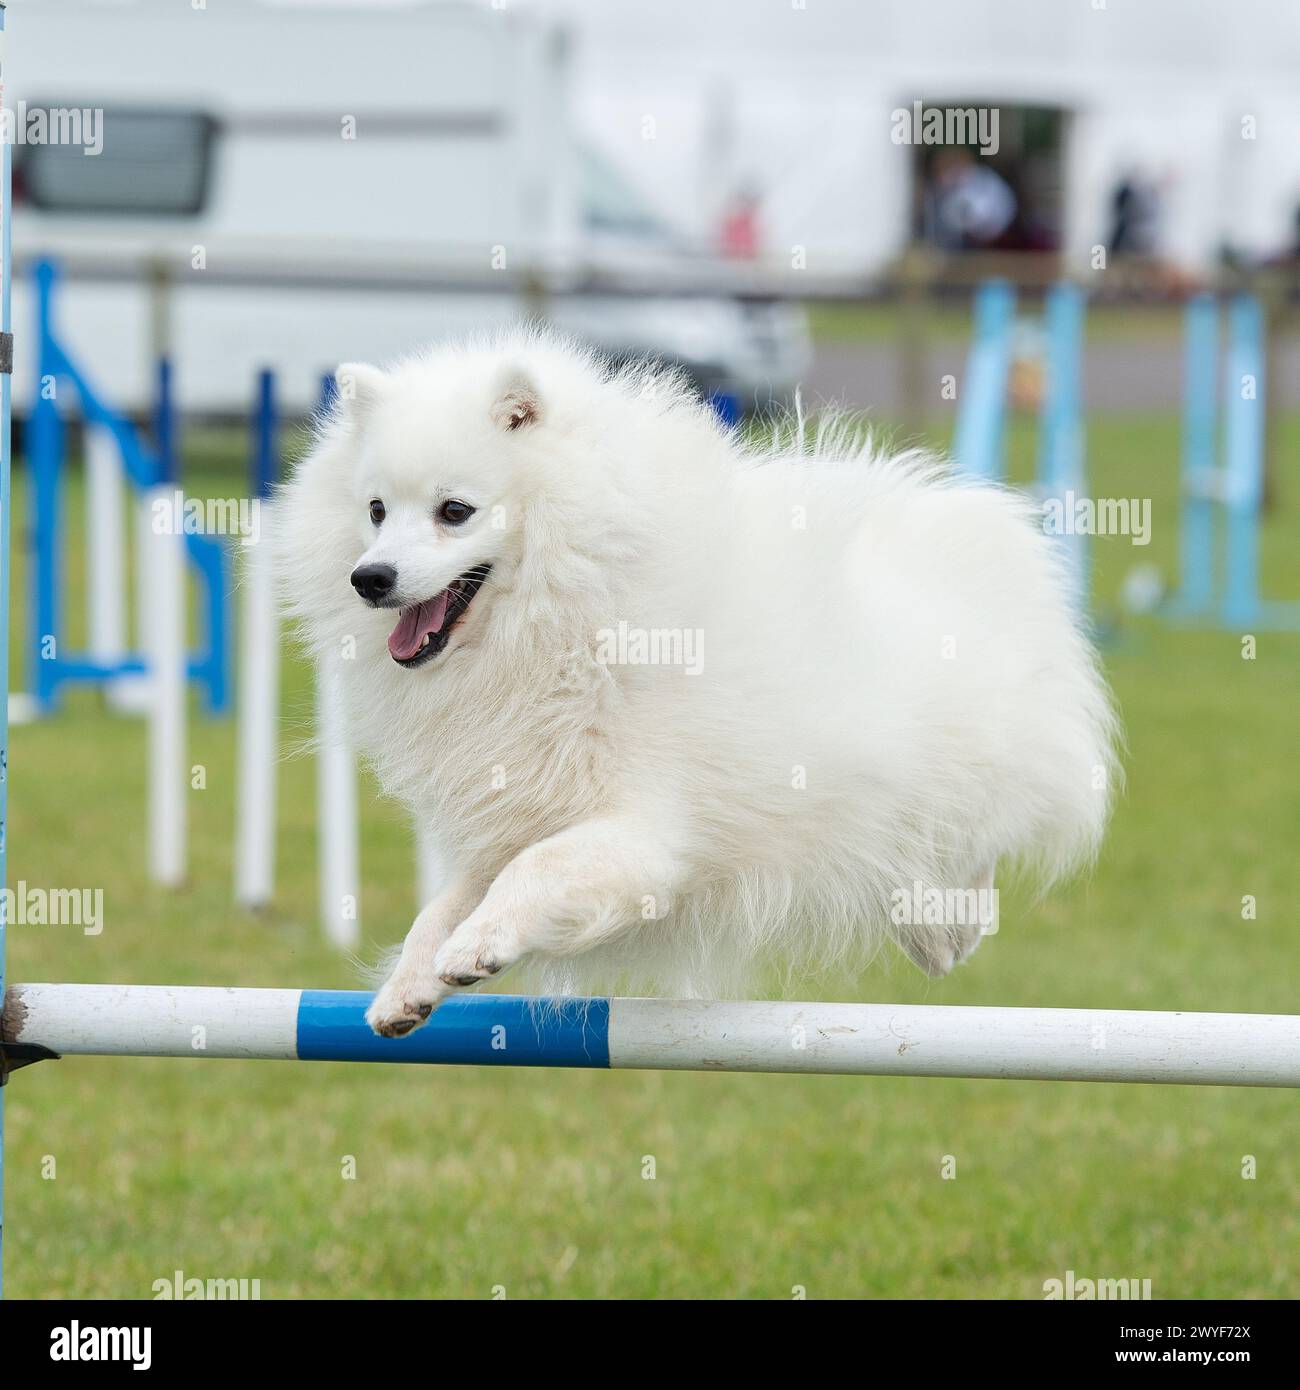 american eskimo dog competing in agility competition Stock Photo